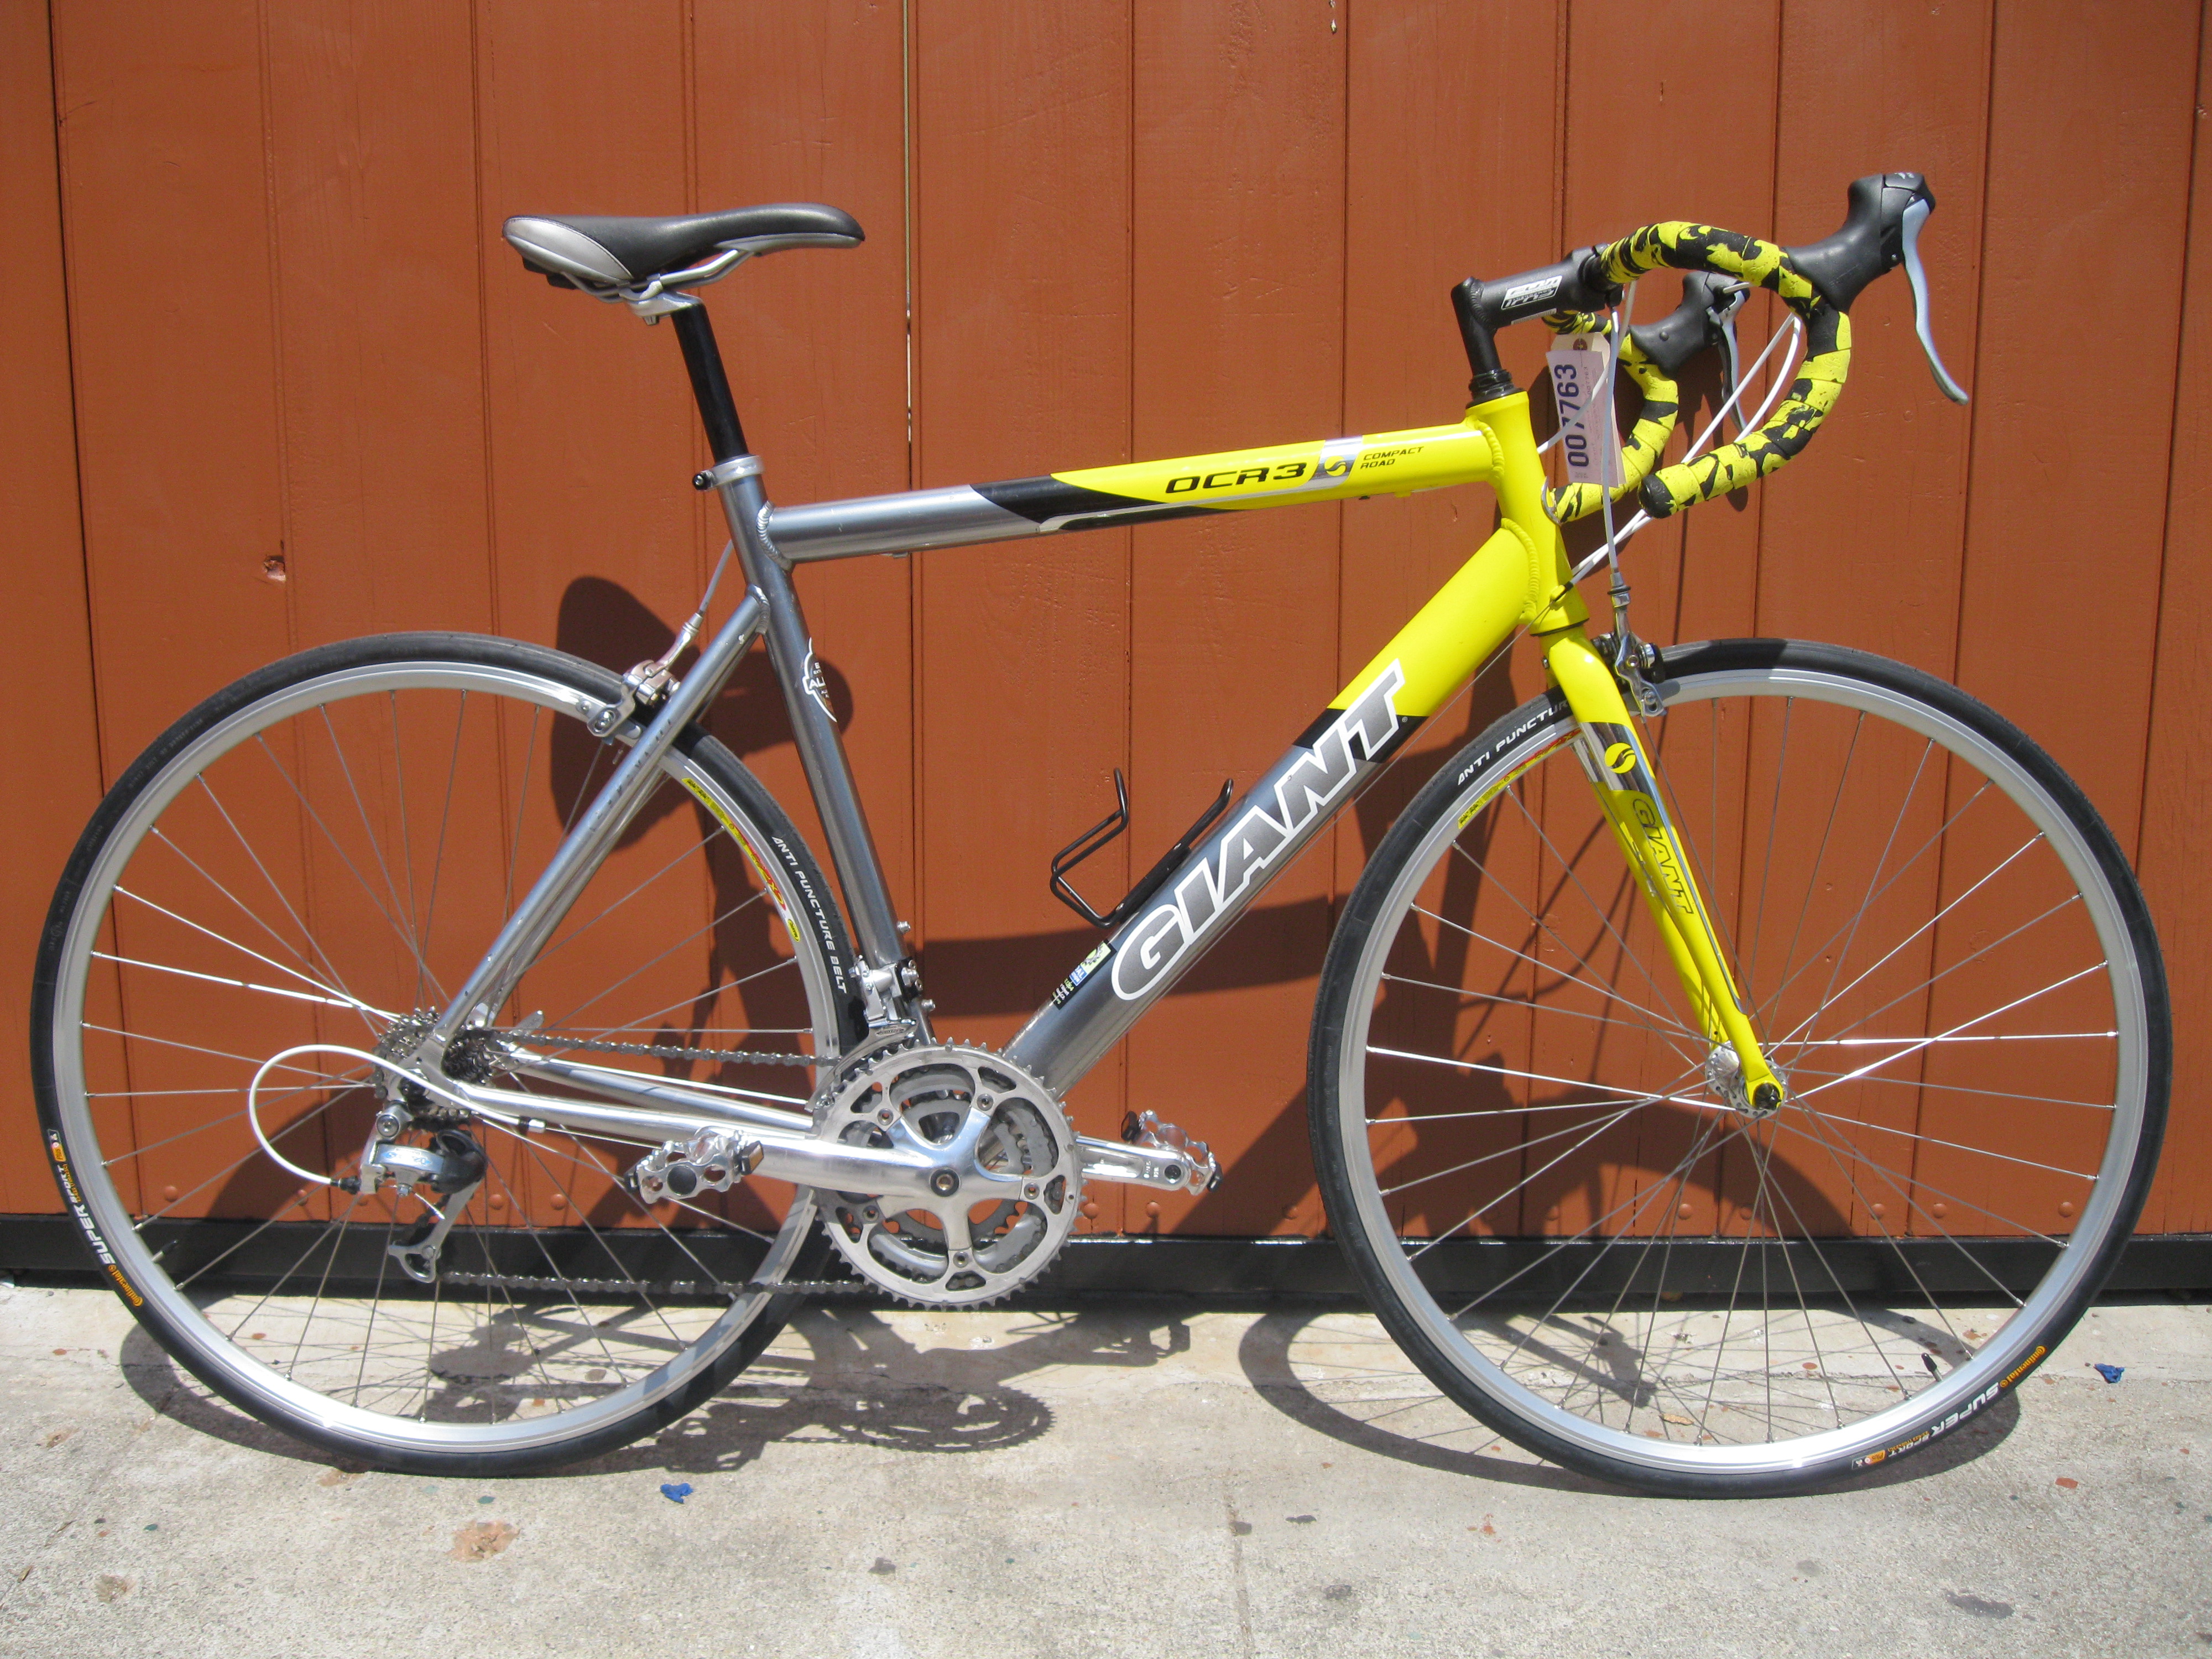 giant ocr3 road bike for sale Used Road Bikes For Sale - Cheap Road ...